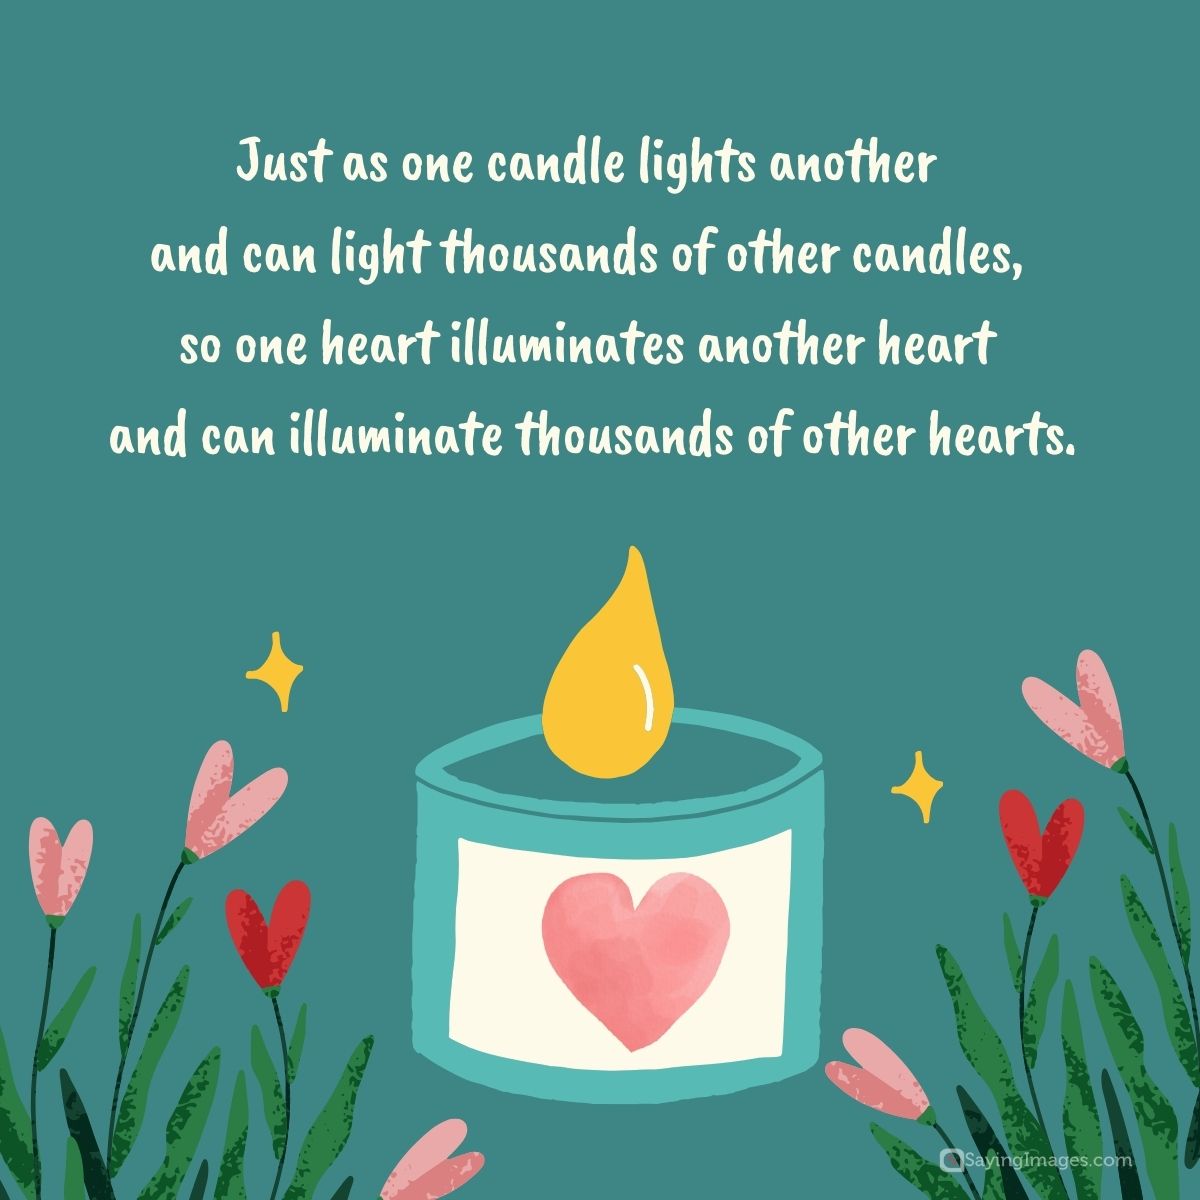 Just as one candle lights another and can light thousands of other candles